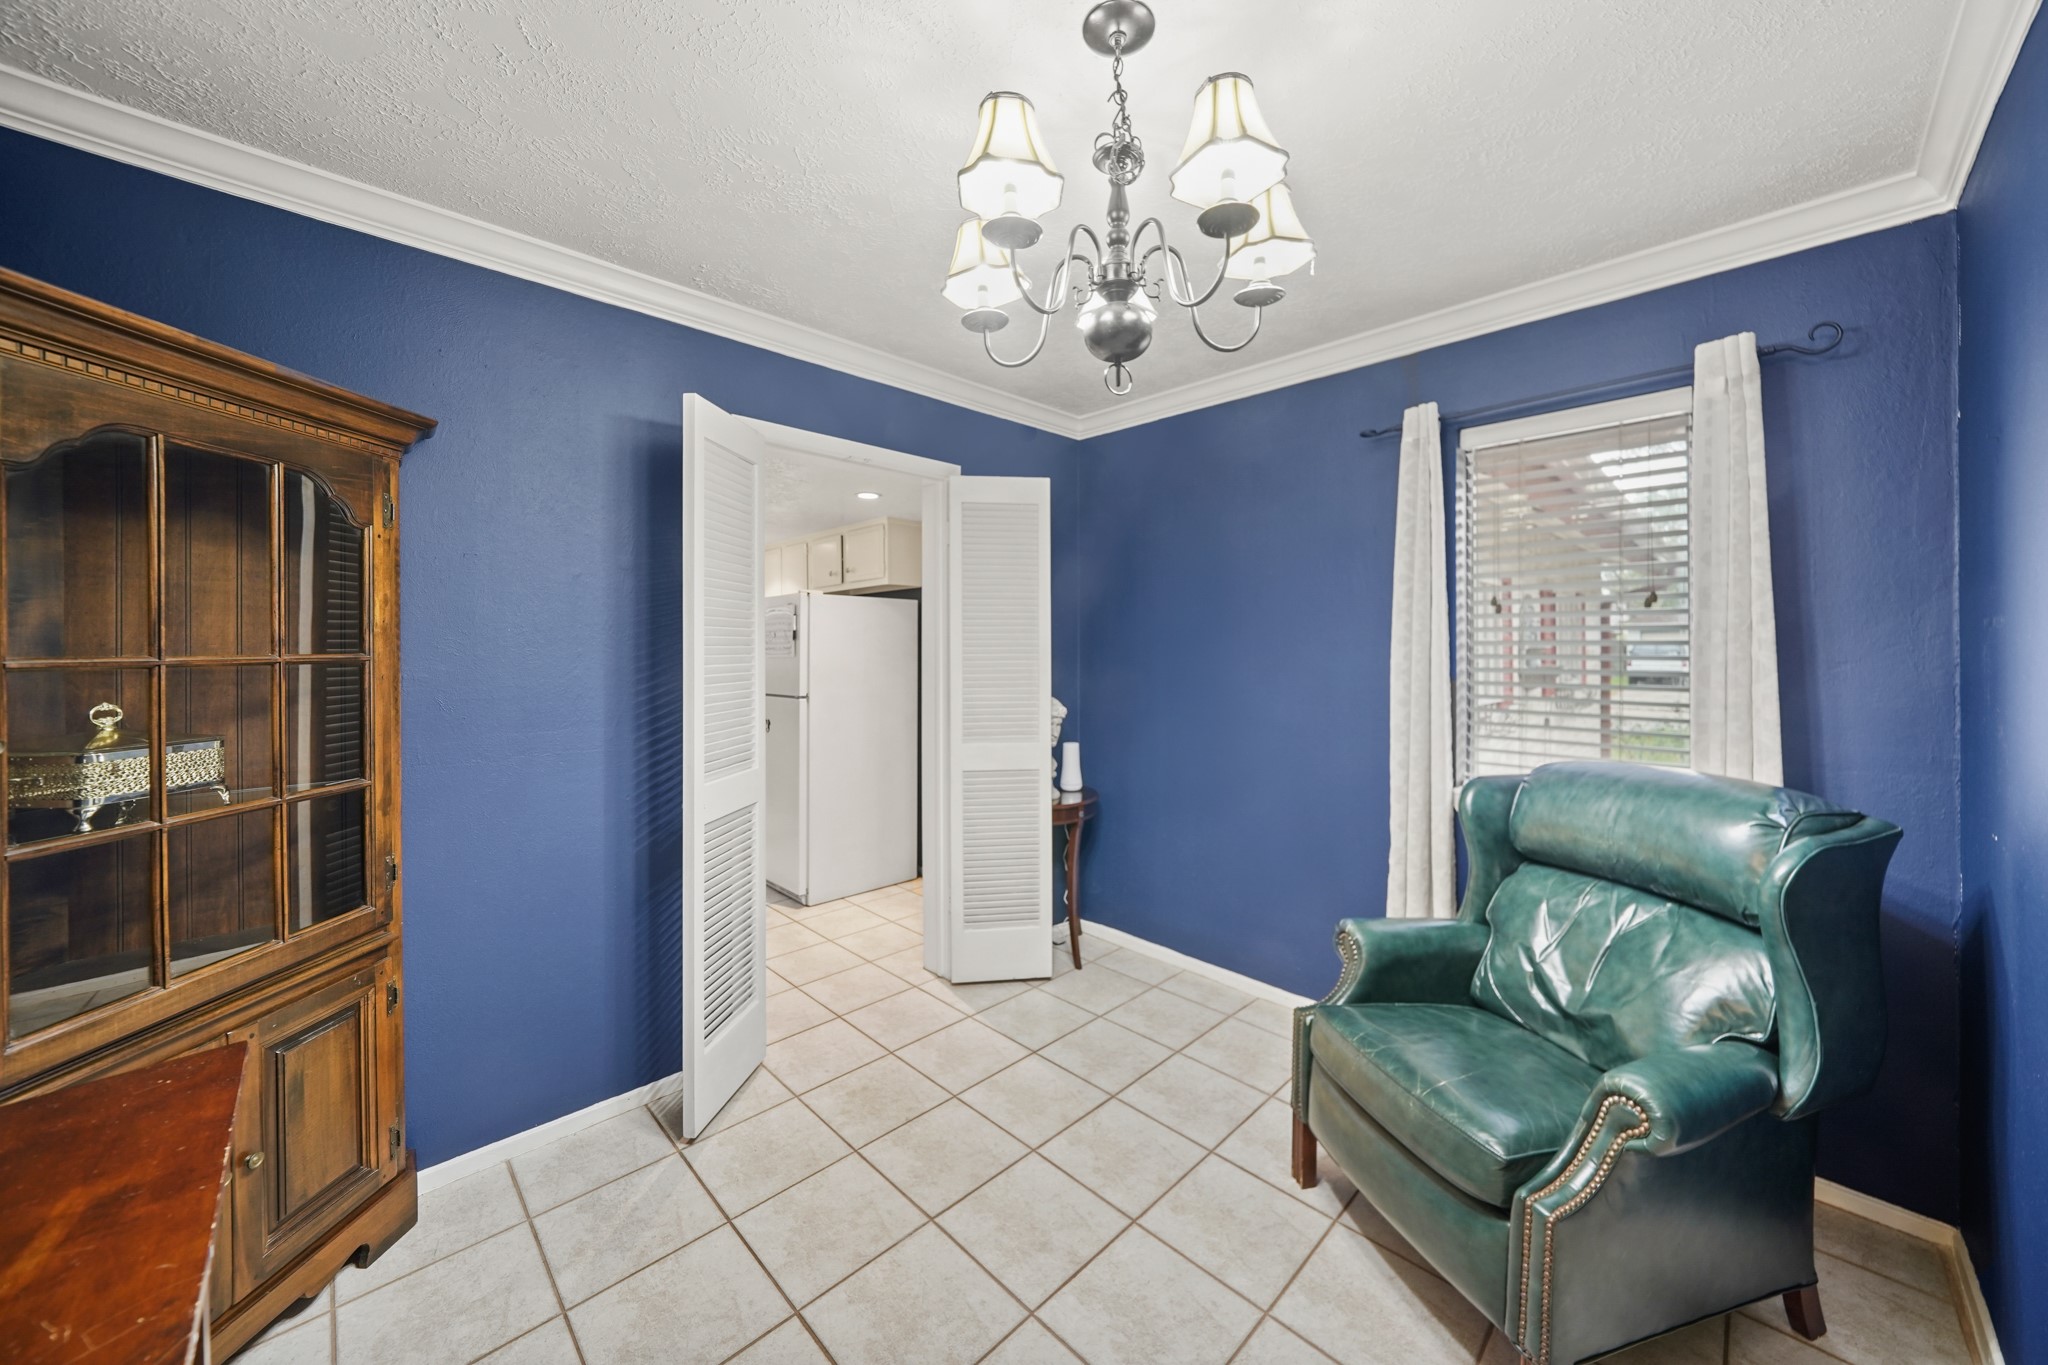 You'll appreciate the flexibility in this great floorplan with a spacious breakfast area or den just off of the foyer. This space offers tile floors, decorator paint, crown molding, and a stylish chandelier. By-fold doors lead to the kitchen.